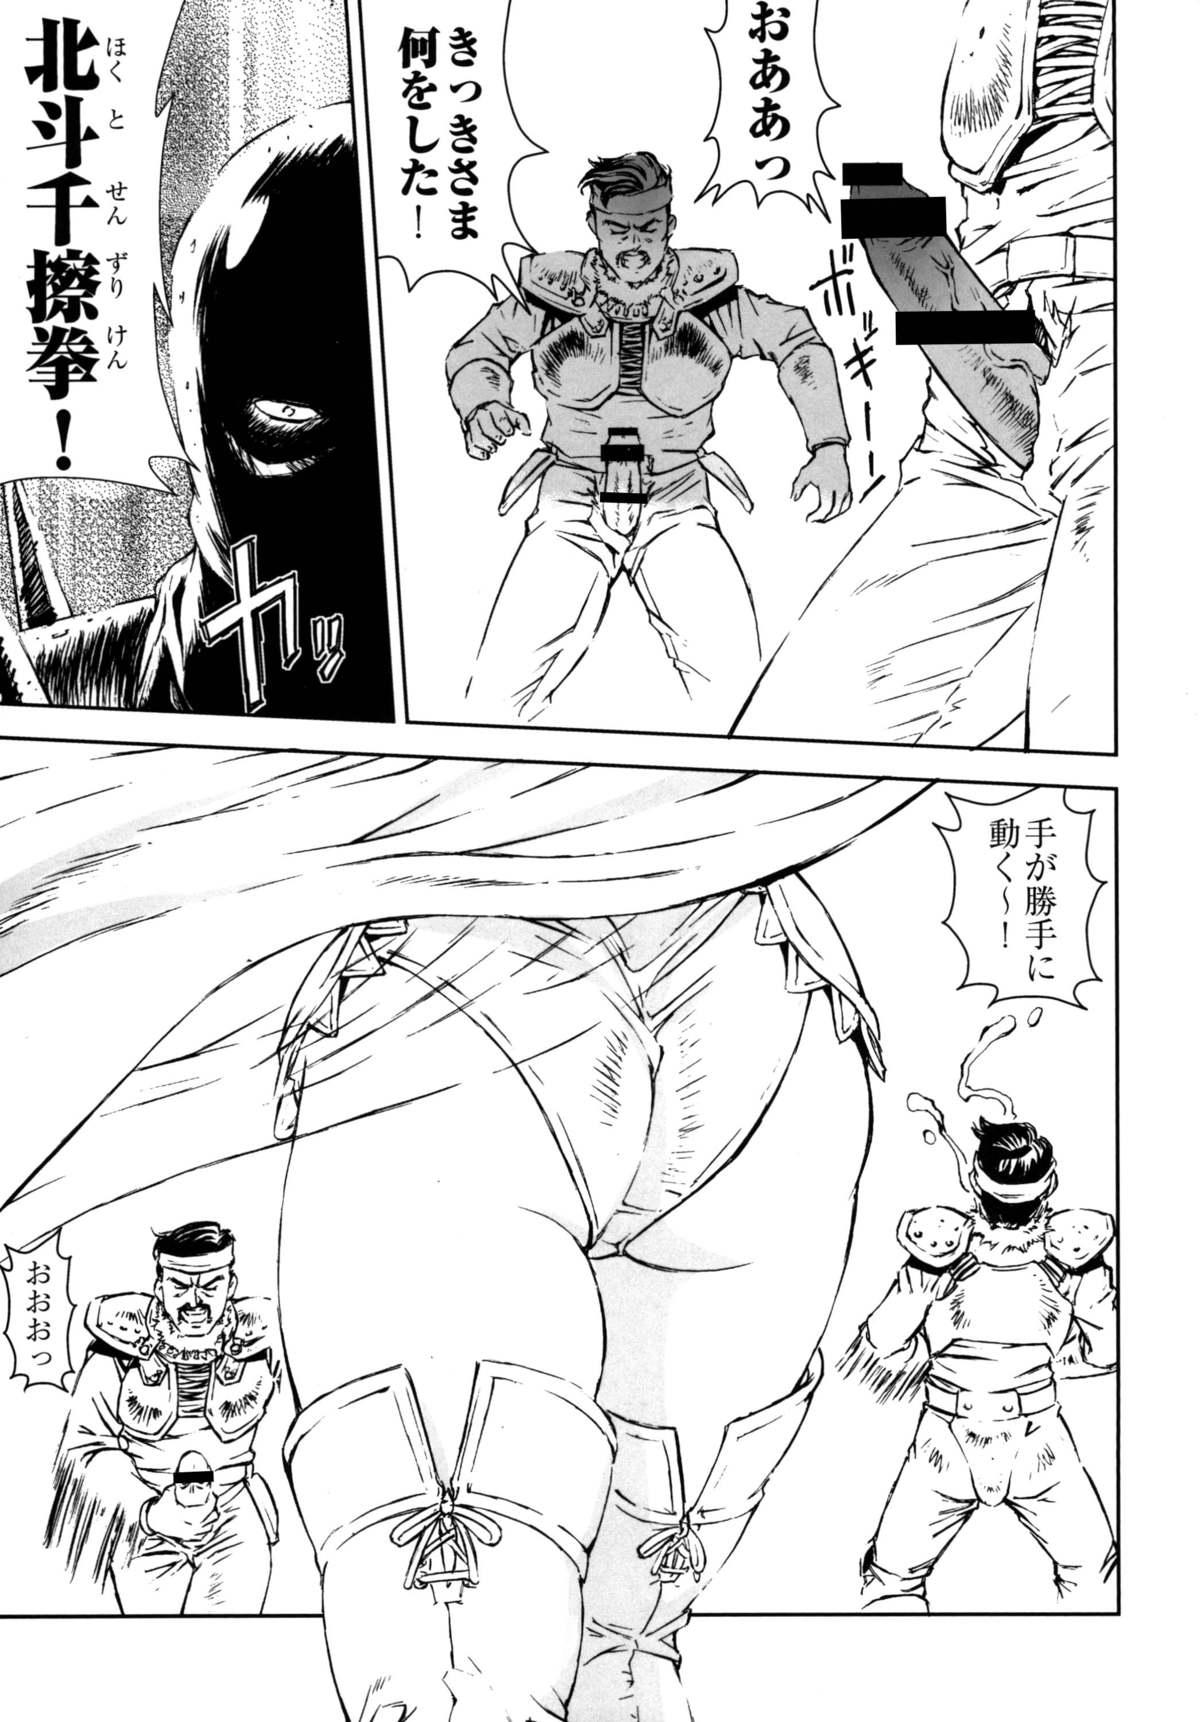 Female Orgasm HOT BITCH JUMP 2 - Kochikame Fist of the north star Gay Kissing - Page 6